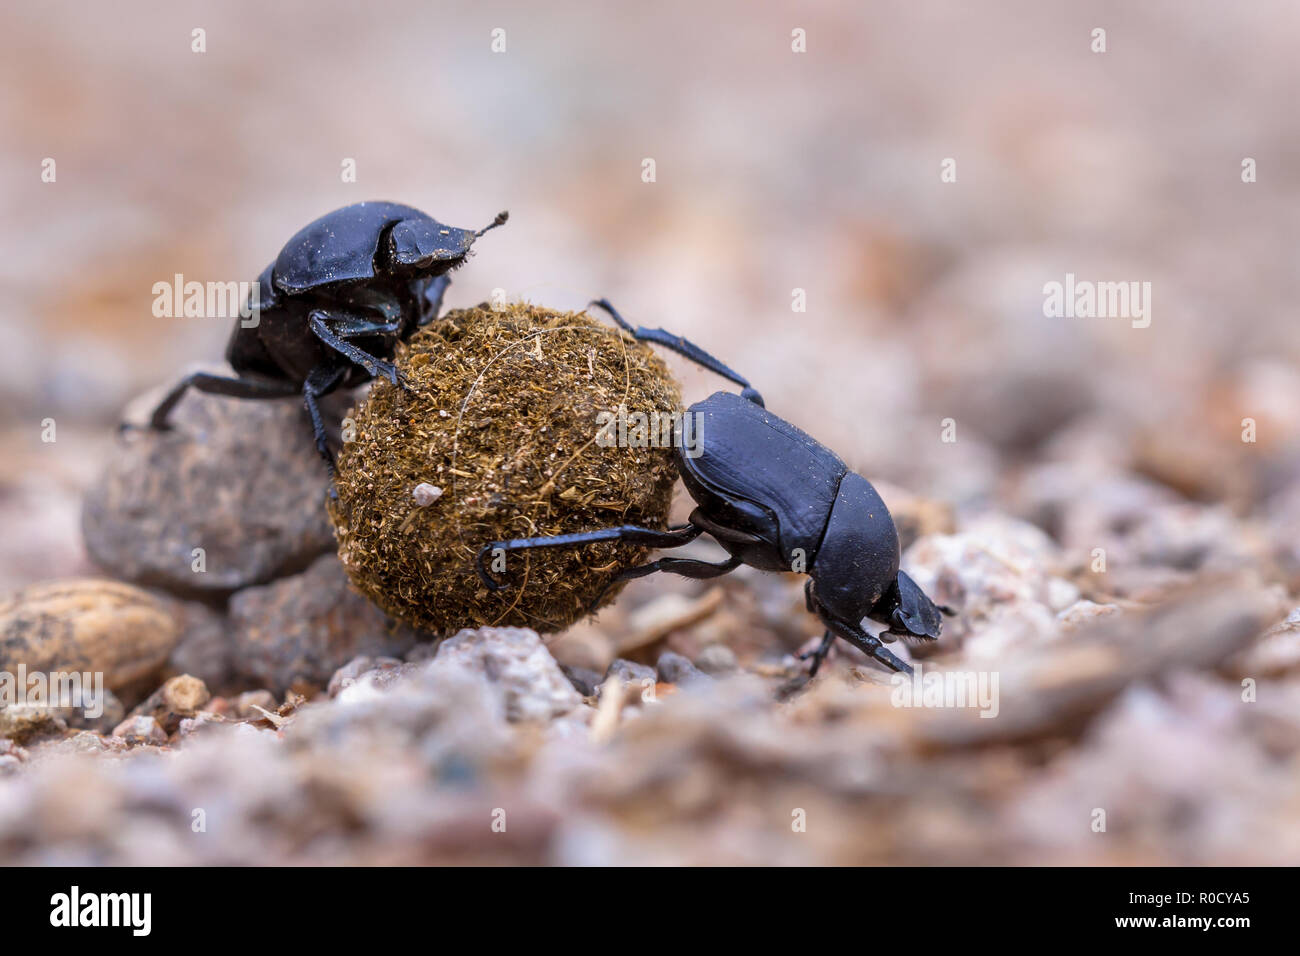 Two dung beetles attempting the challenge to roll a ball through gravel Stock Photo